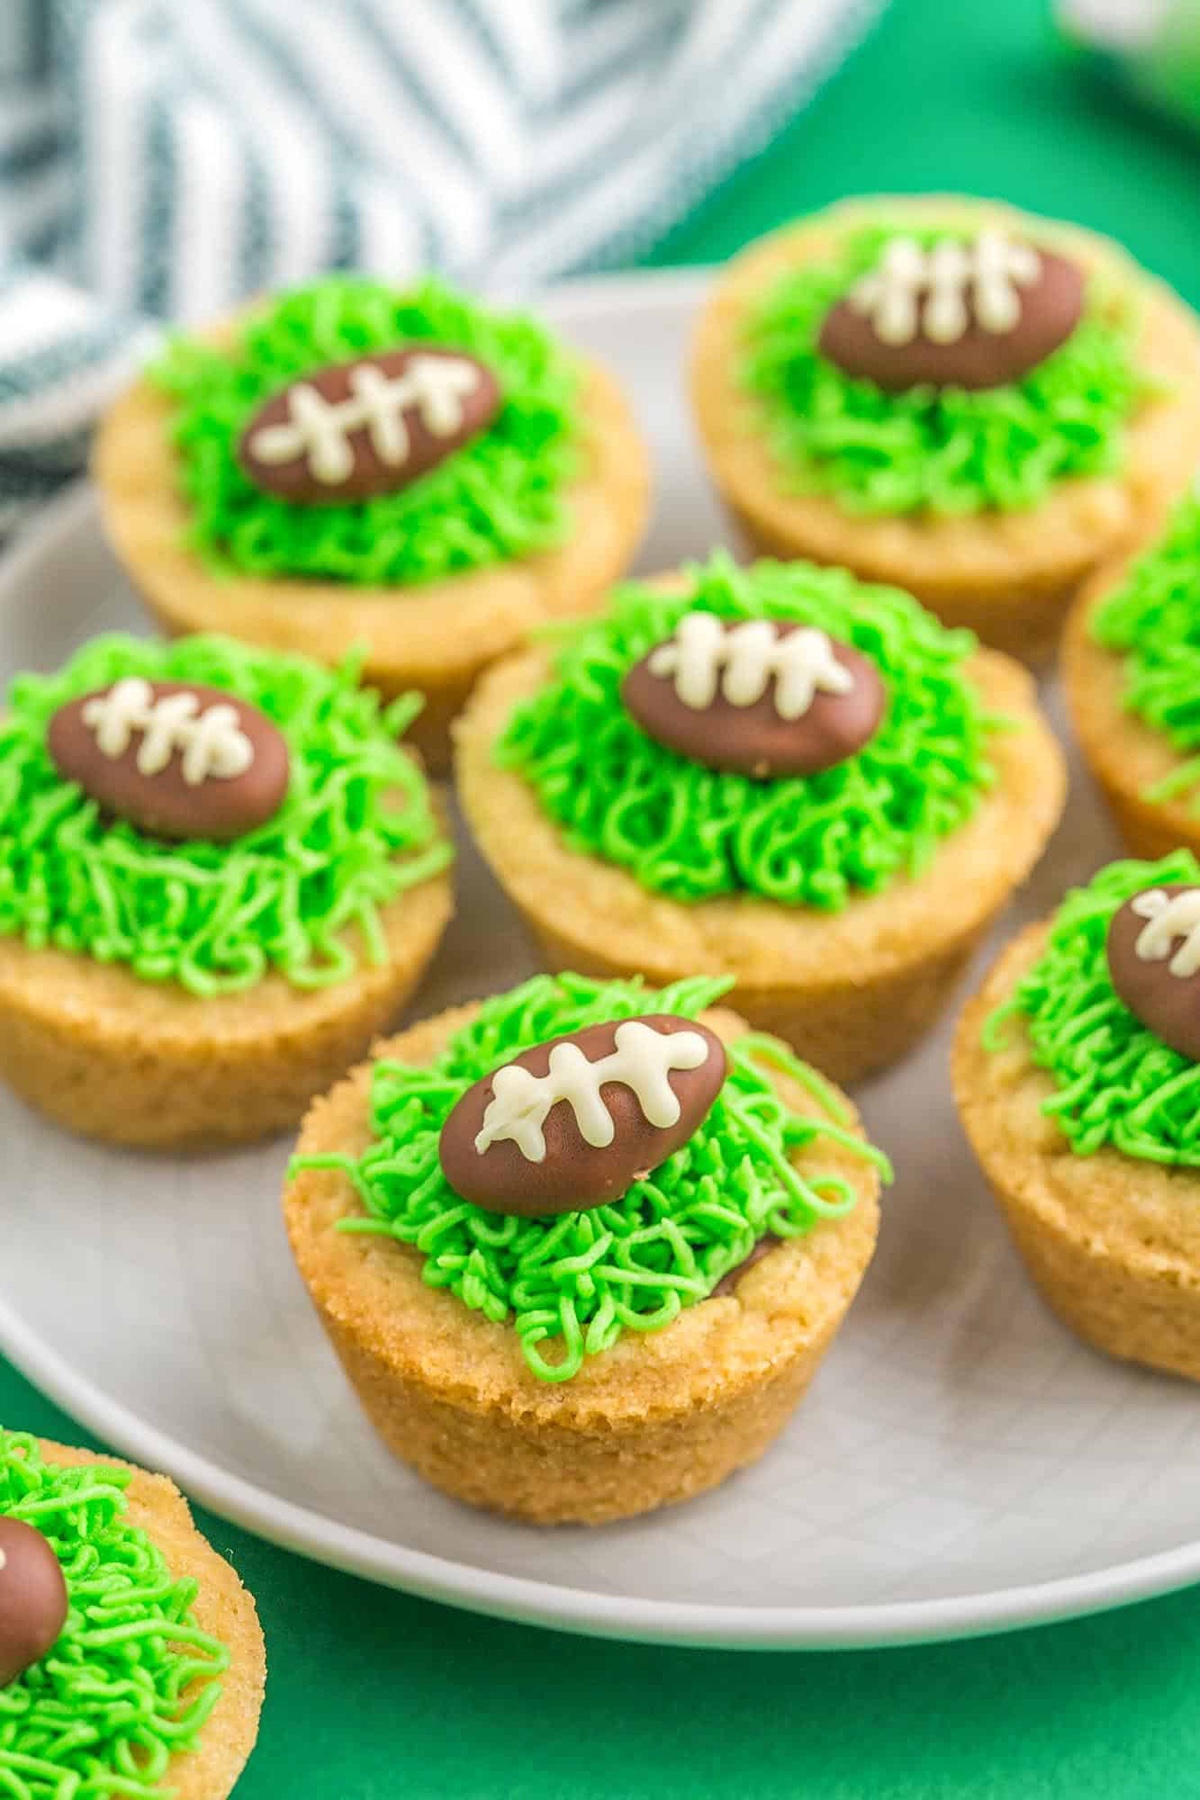 Cute little cookie cups with grass and football piped on top.